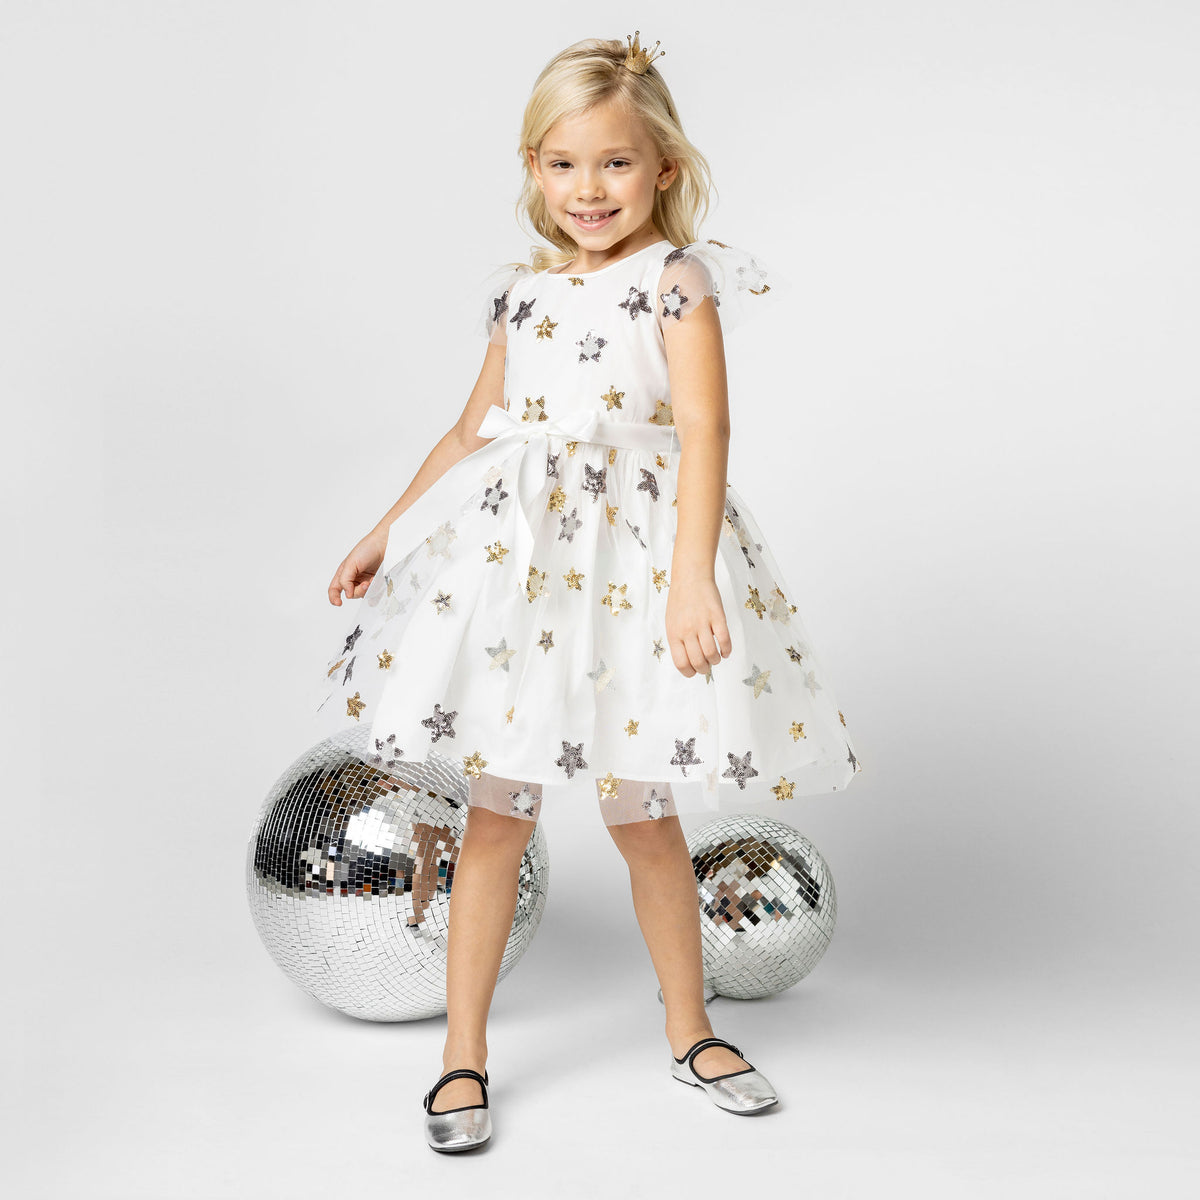 Aster Sequin Star Tulle Girls Party Dress, White